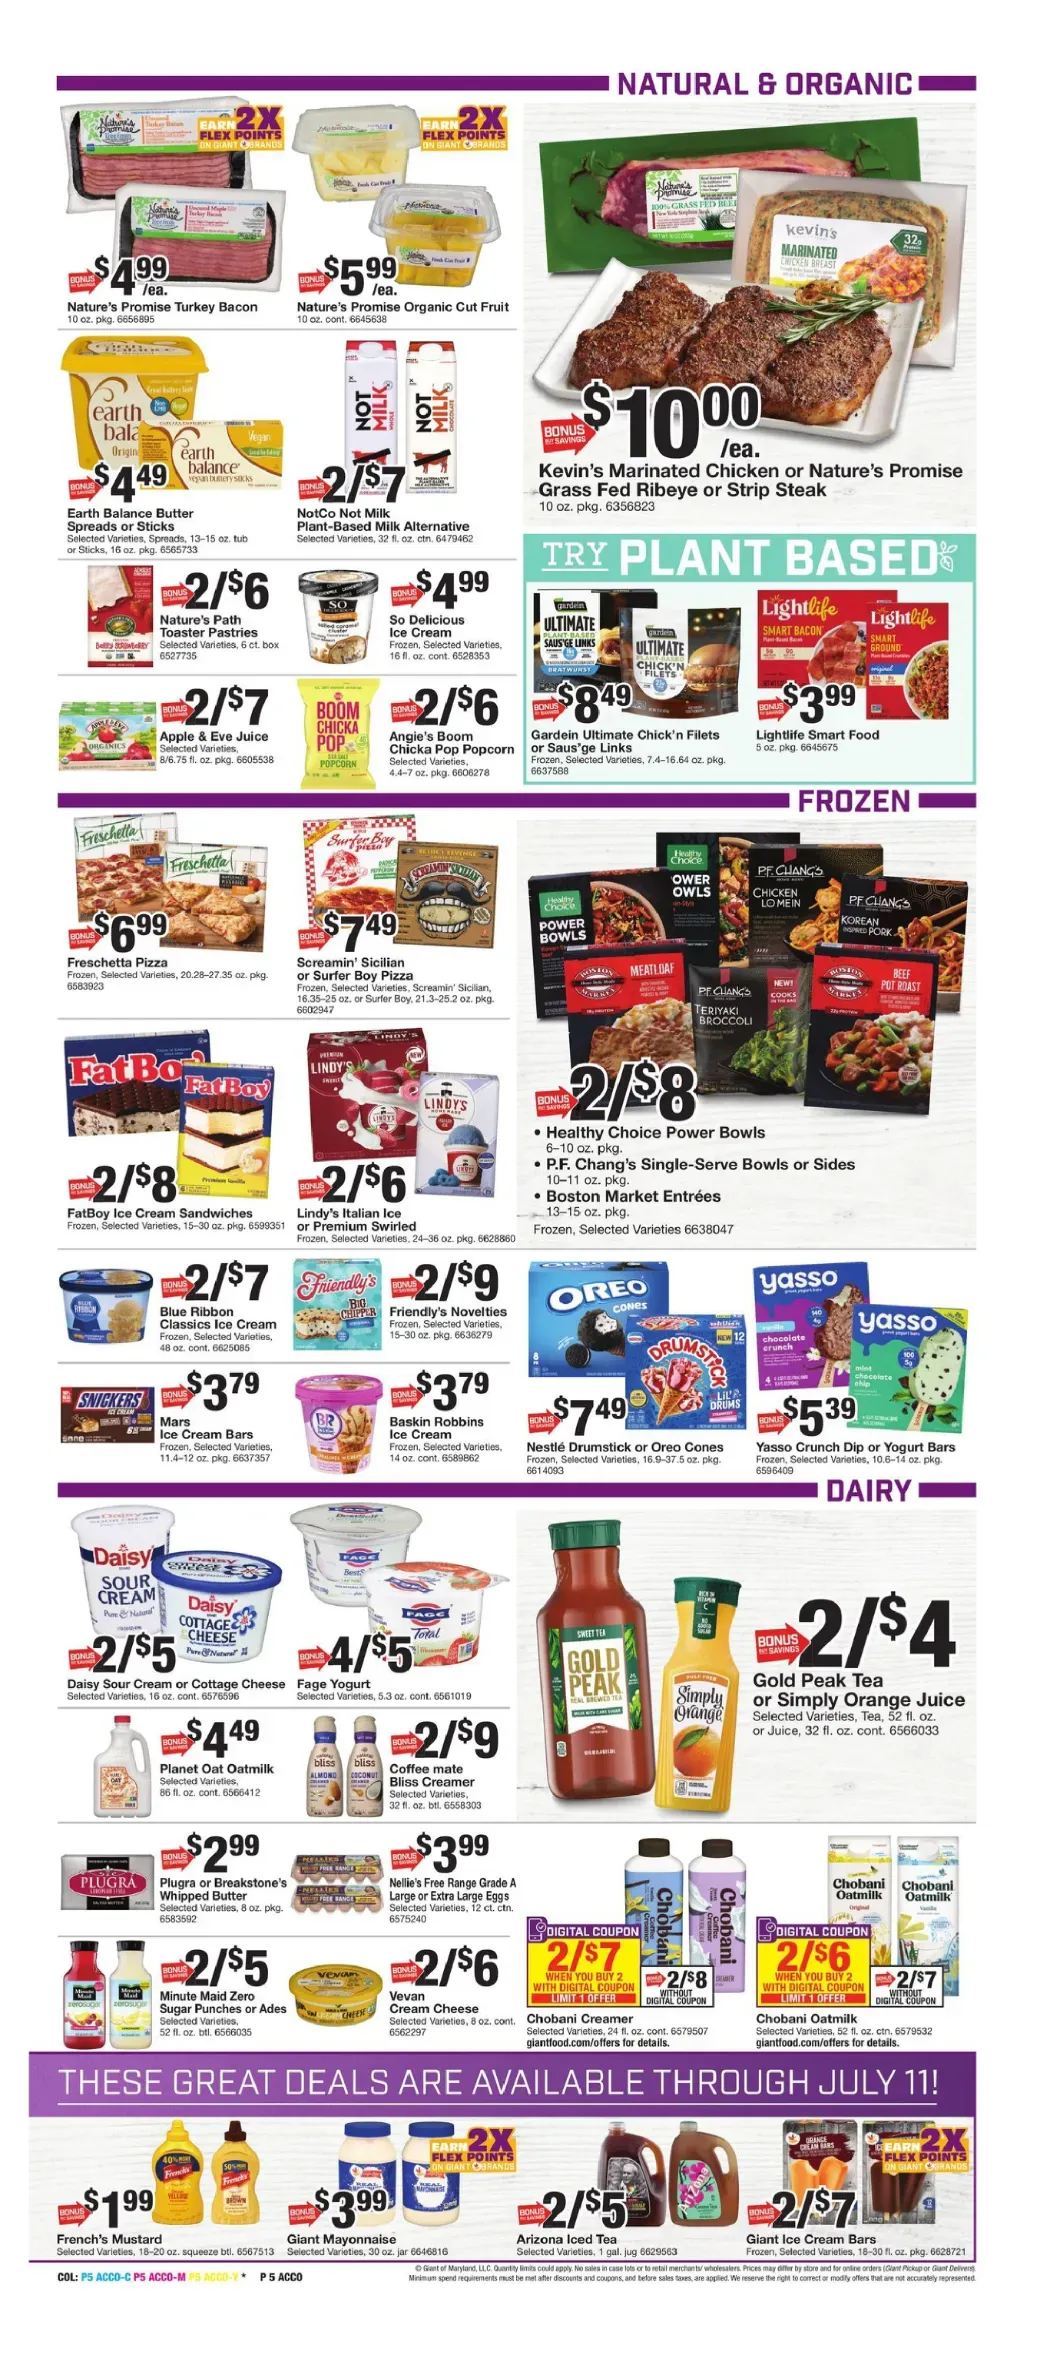 Giant Food July 2024 Weekly Sales, Deals, Discounts and Digital Coupons.